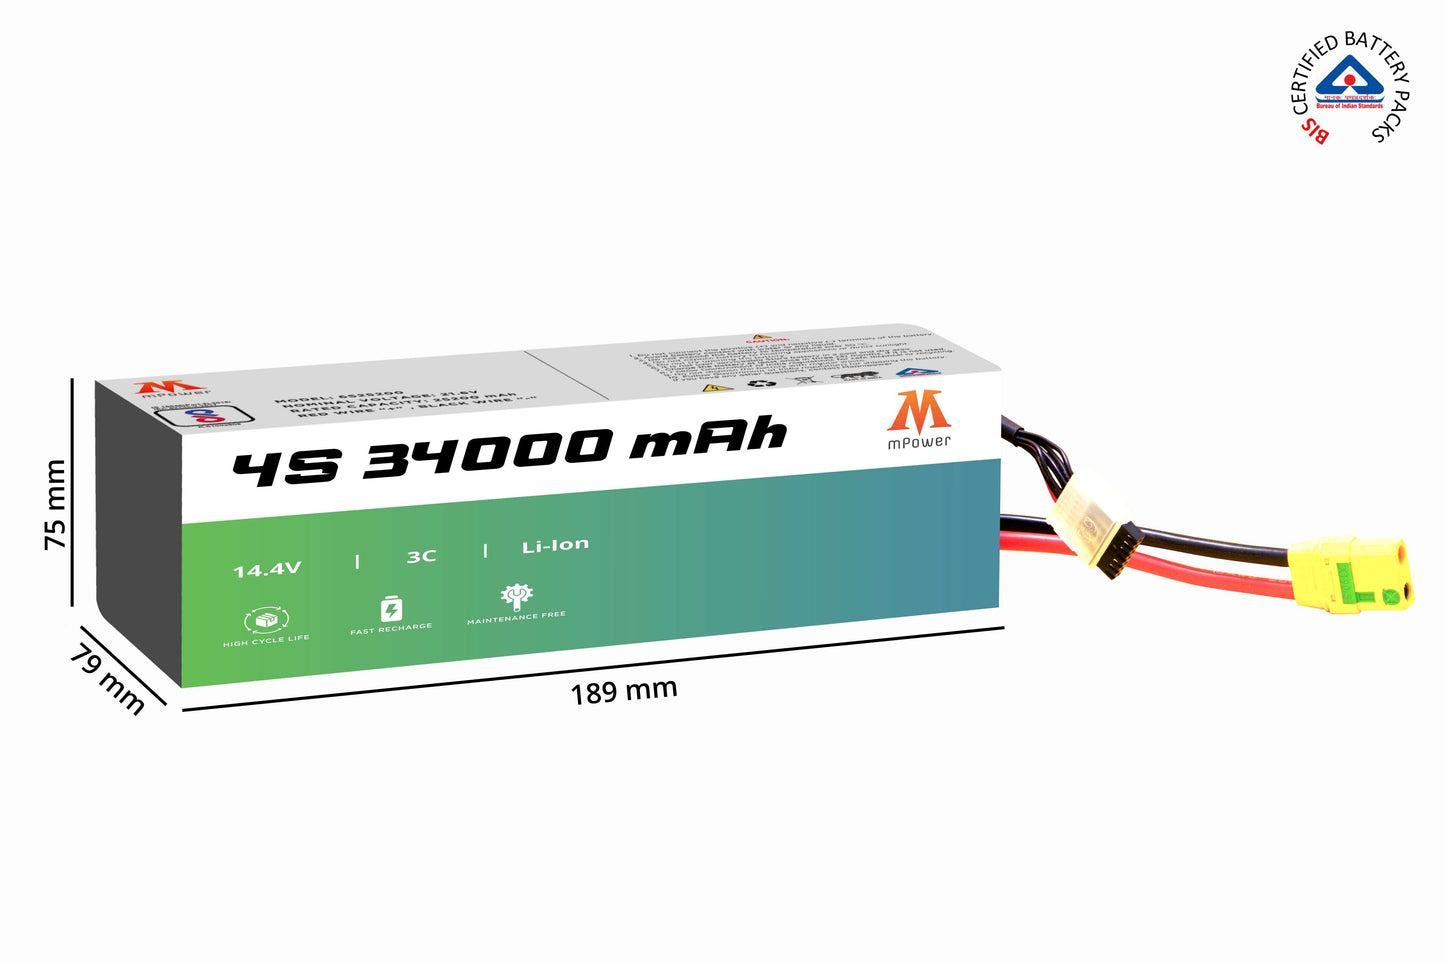 mPower 4S 34000mAh Lithium-Ion Battery for Survey Drones